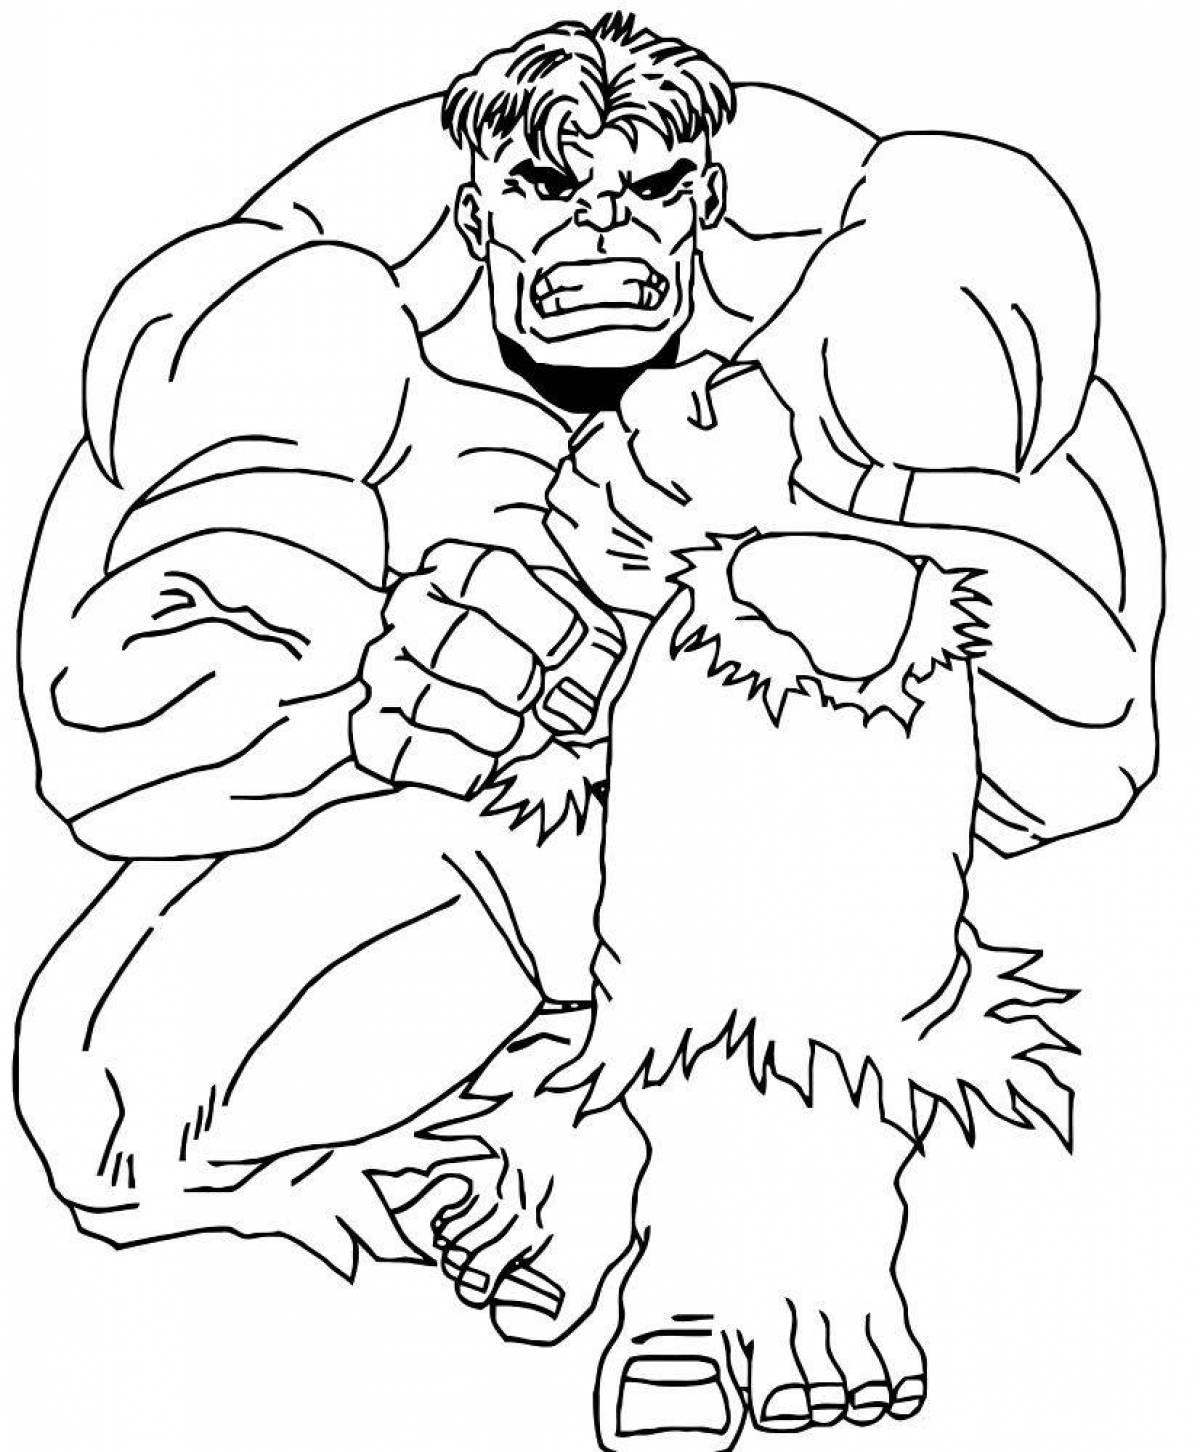 Live superheroes coloring pages for kids